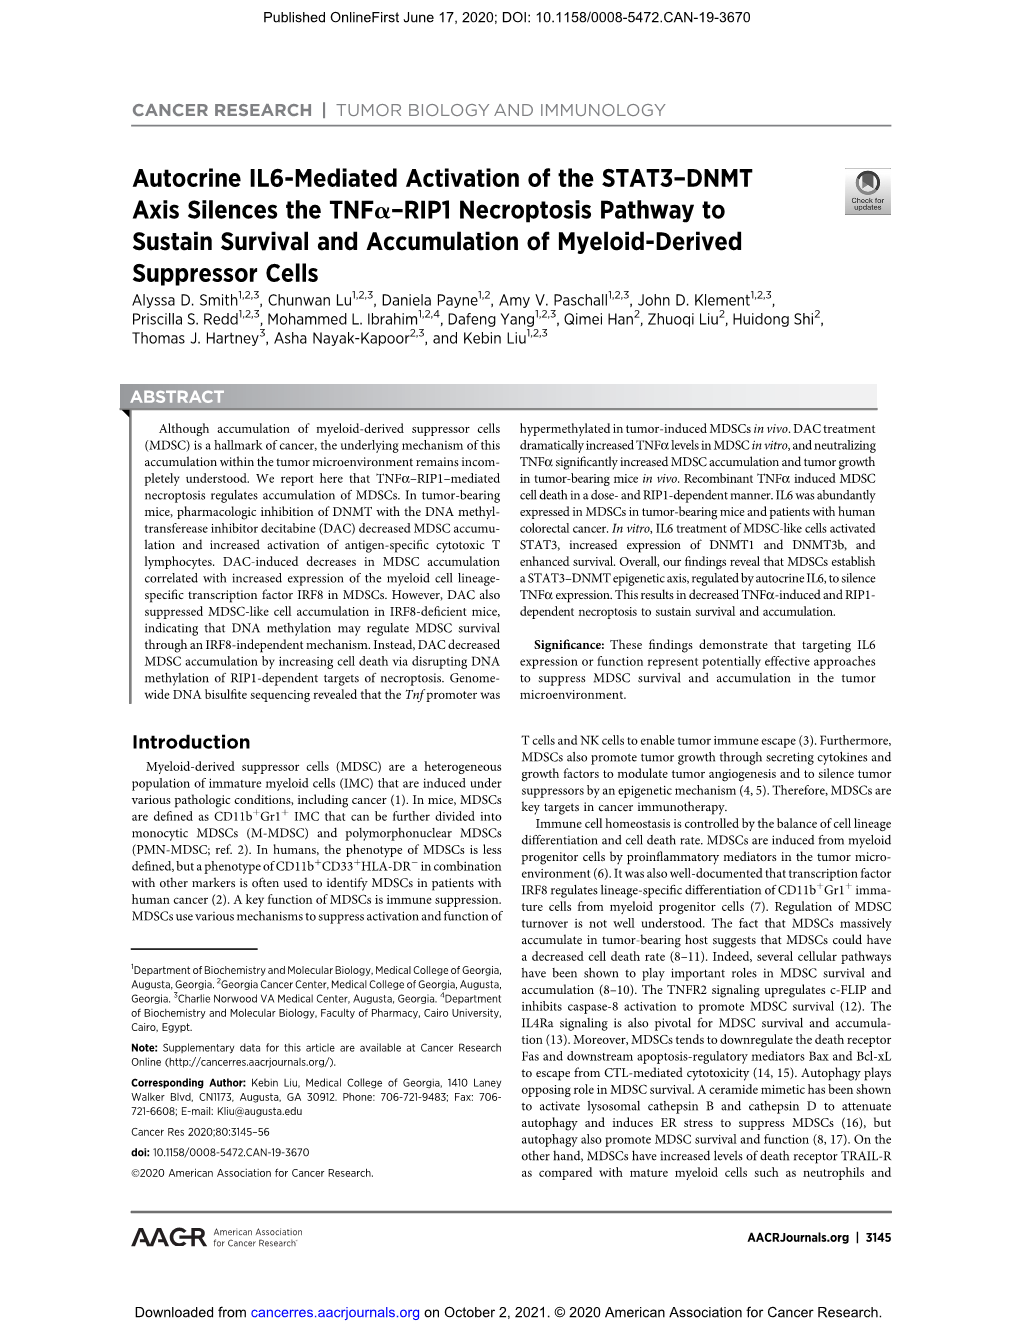 Autocrine IL6-Mediated Activation of the STAT3–DNMT Axis Silences the Tnfa–RIP1 Necroptosis Pathway to Sustain Survival